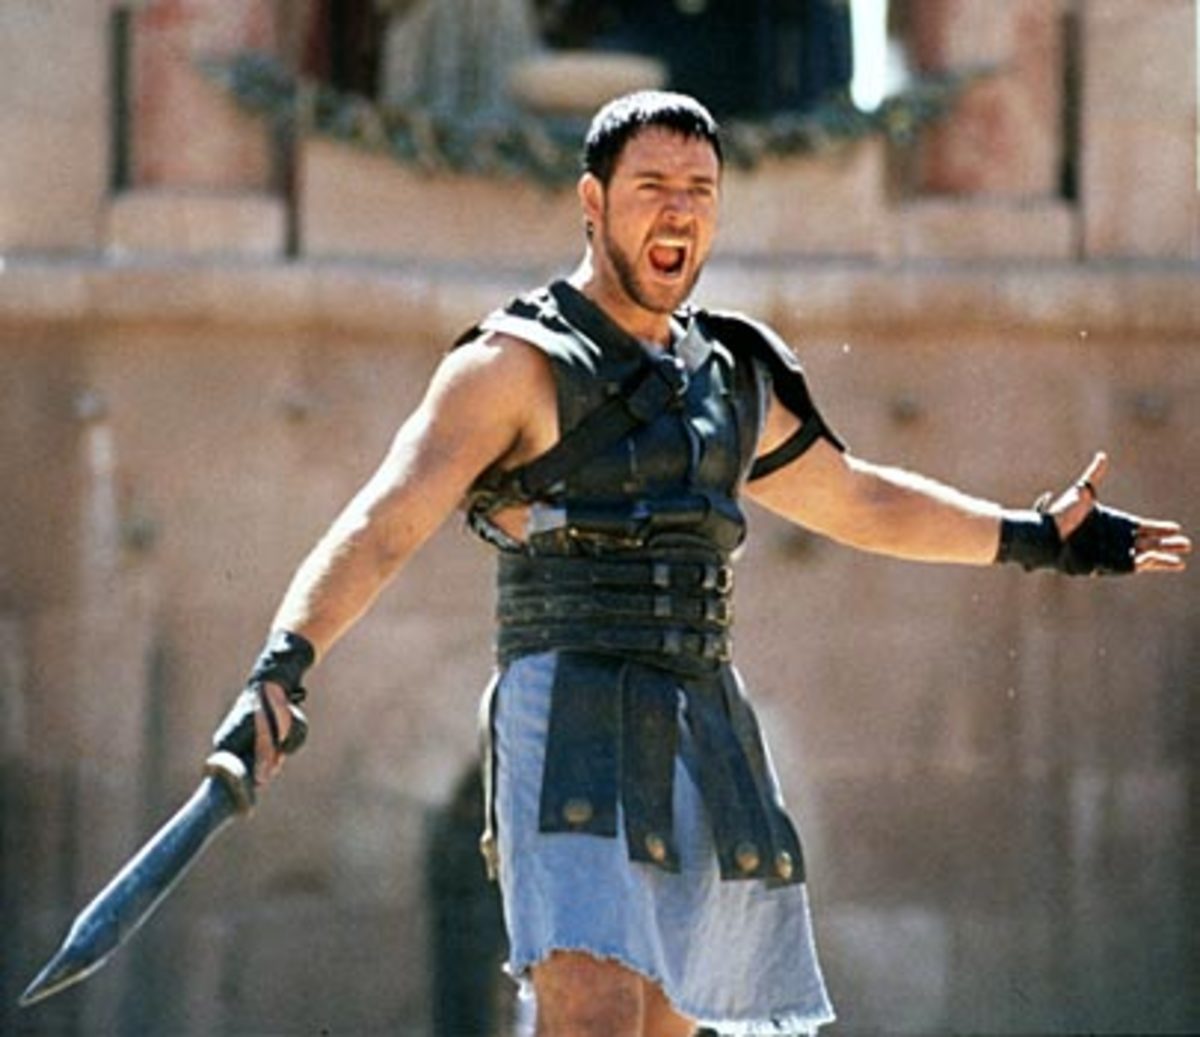 Are there lessons to be learned from "Gladiator"?